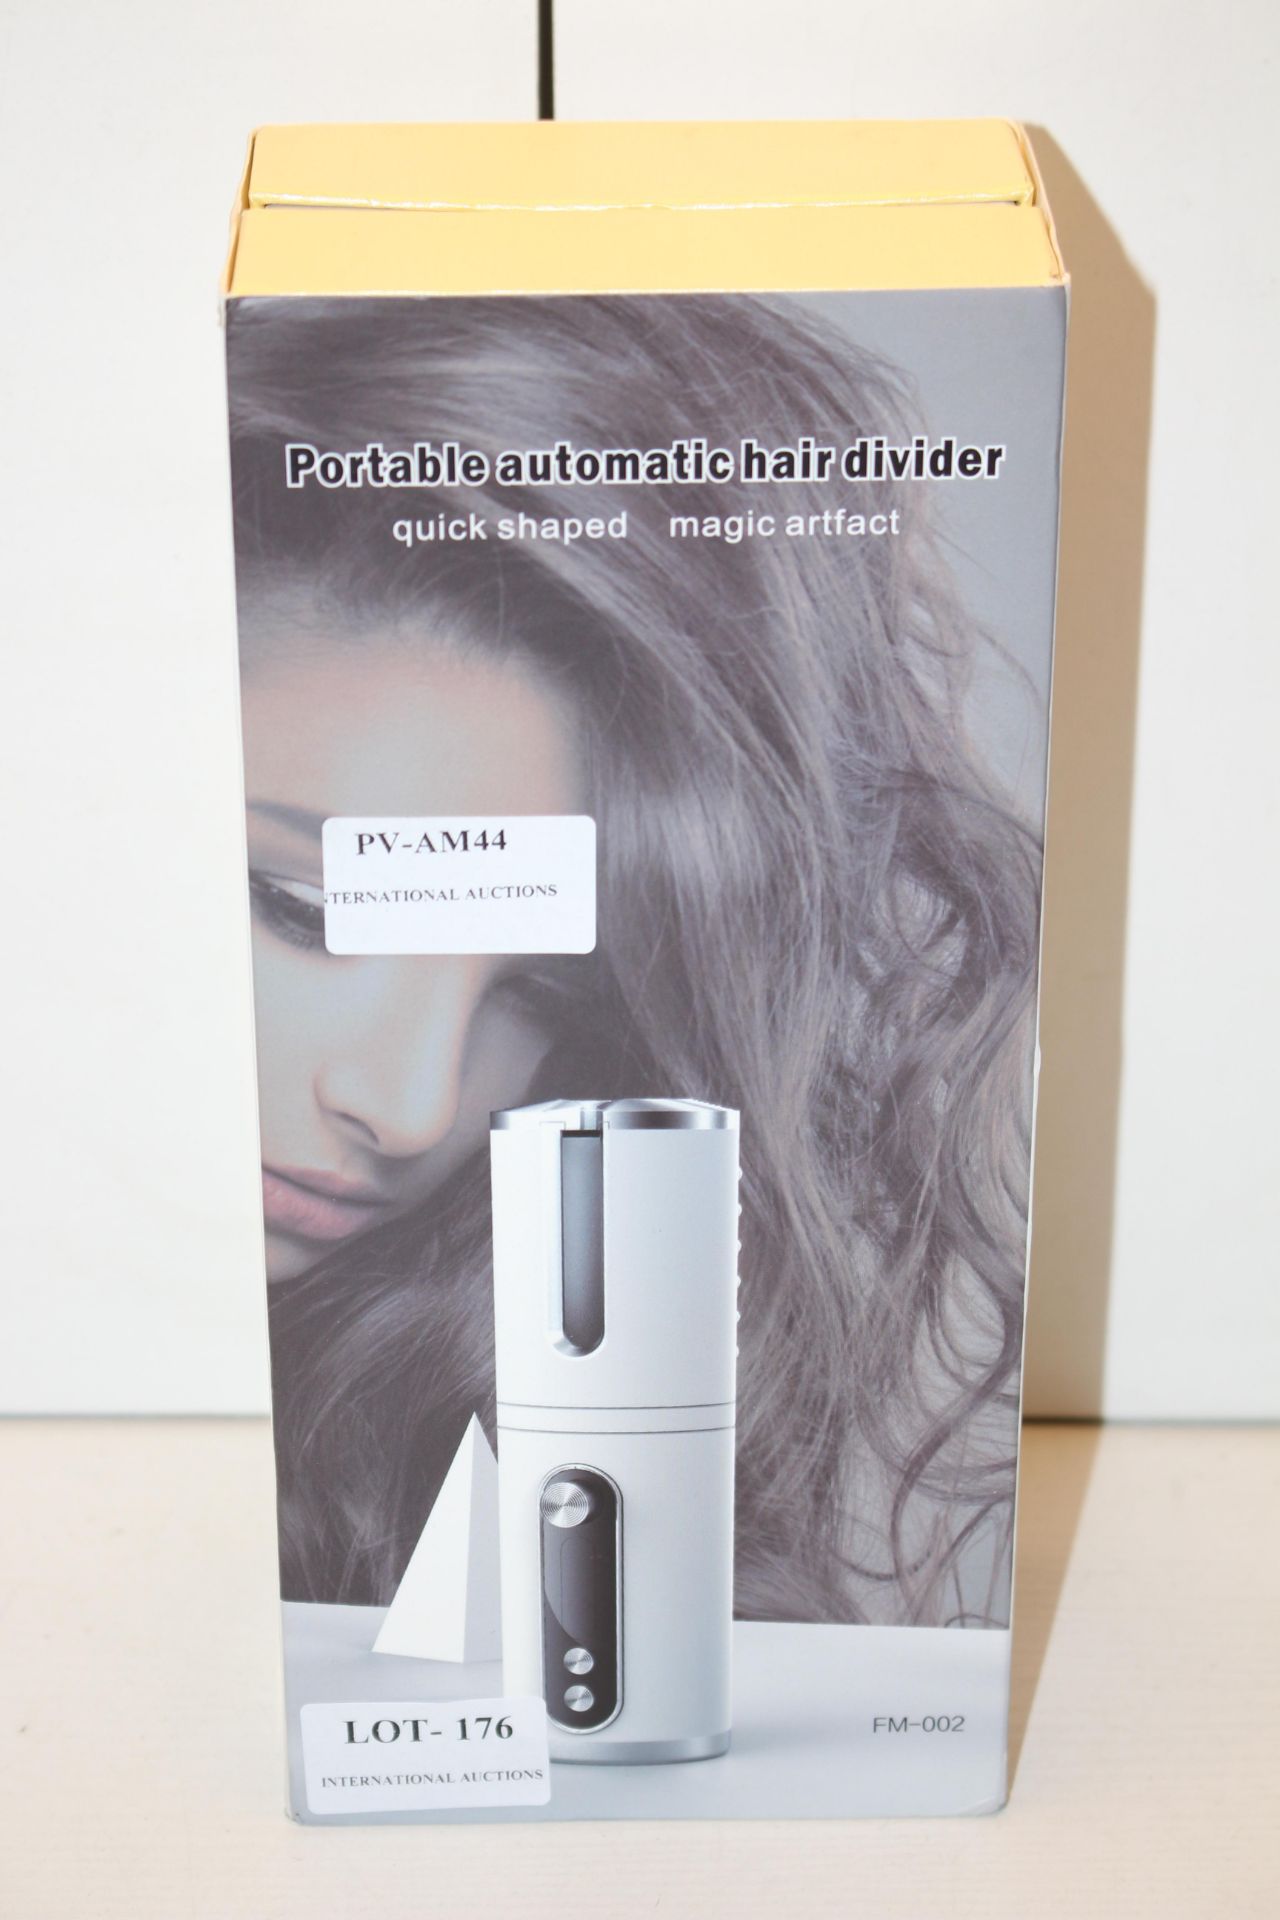 BOXED PORTABLE AUTOMATIC HAIR DRYER Condition ReportAppraisal Available on Request- All Items are